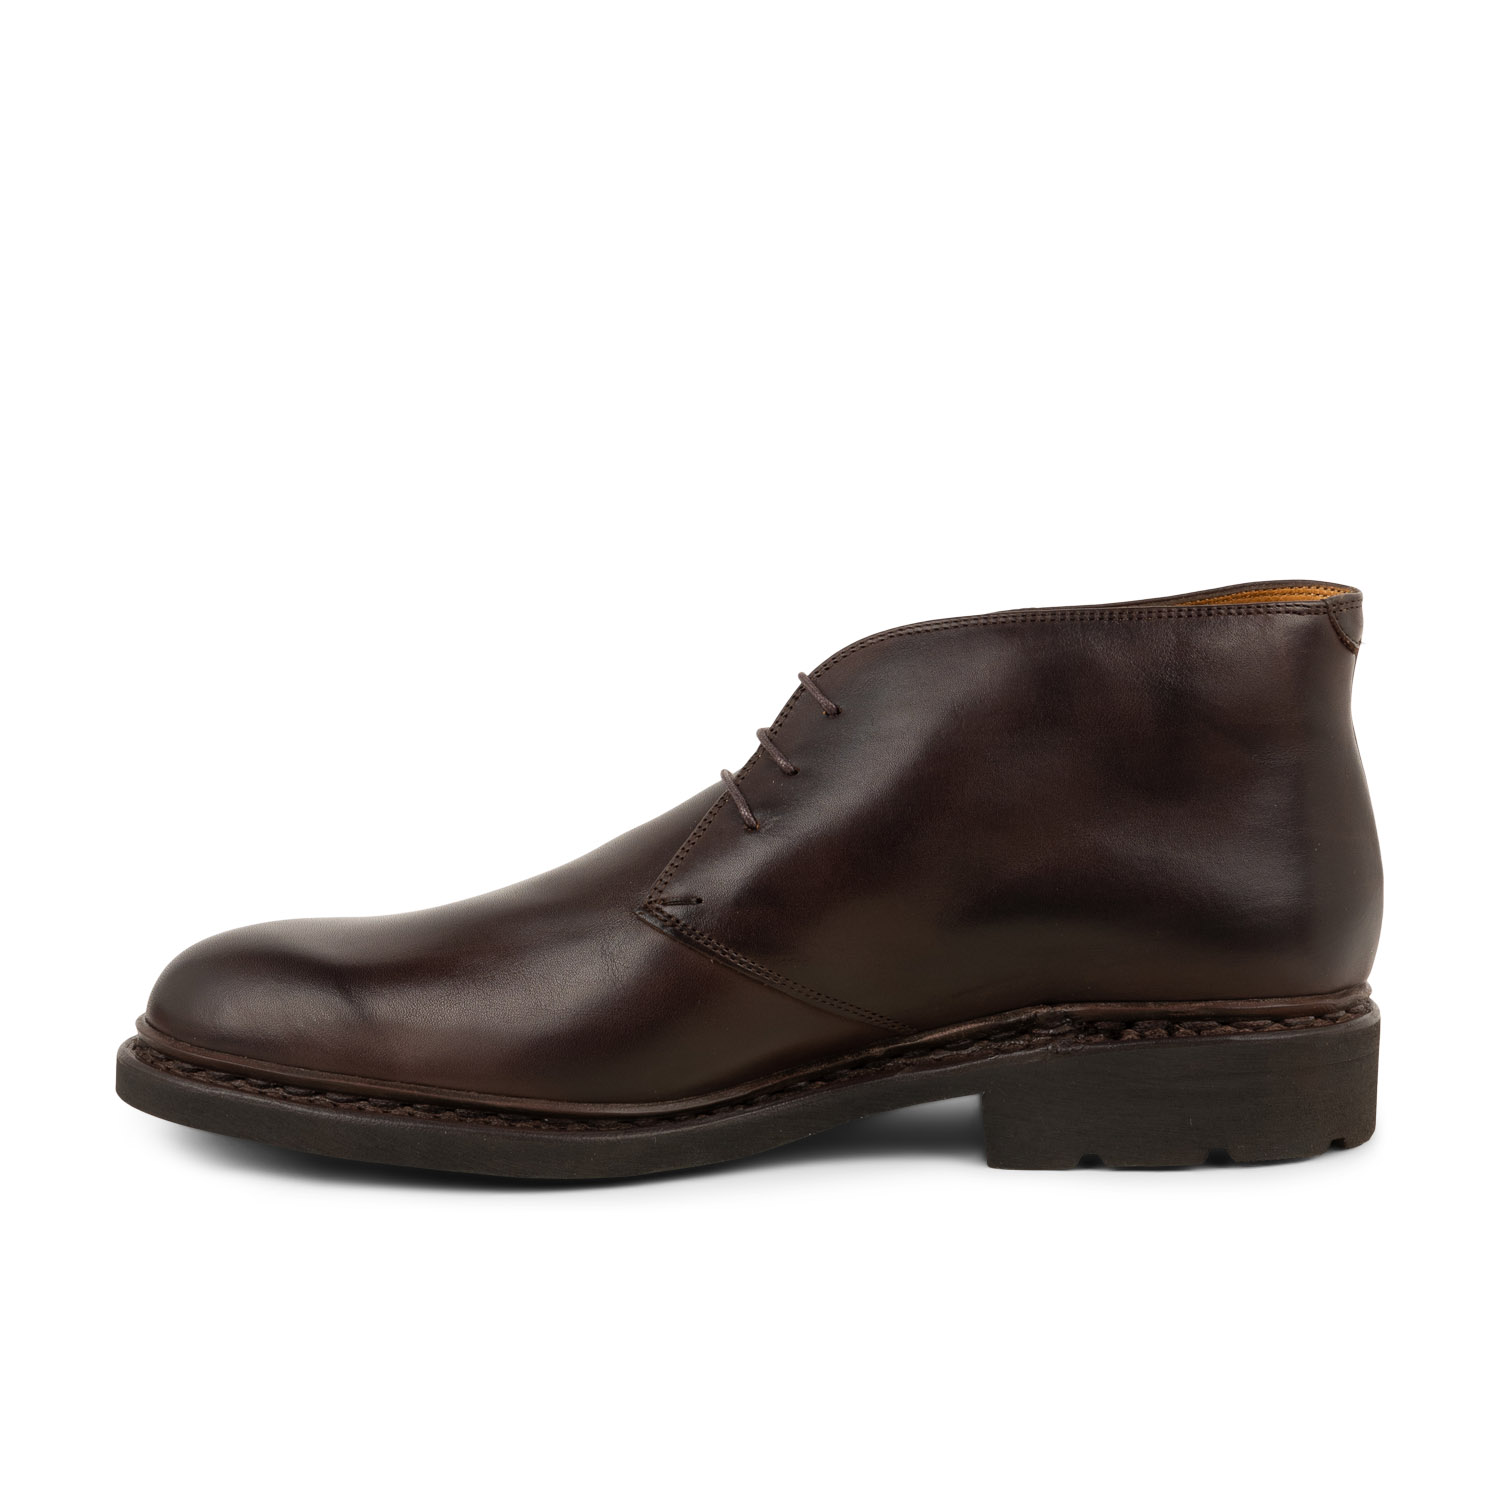 04 - LULLY - PARABOOT - Boots et bottines - Cuir